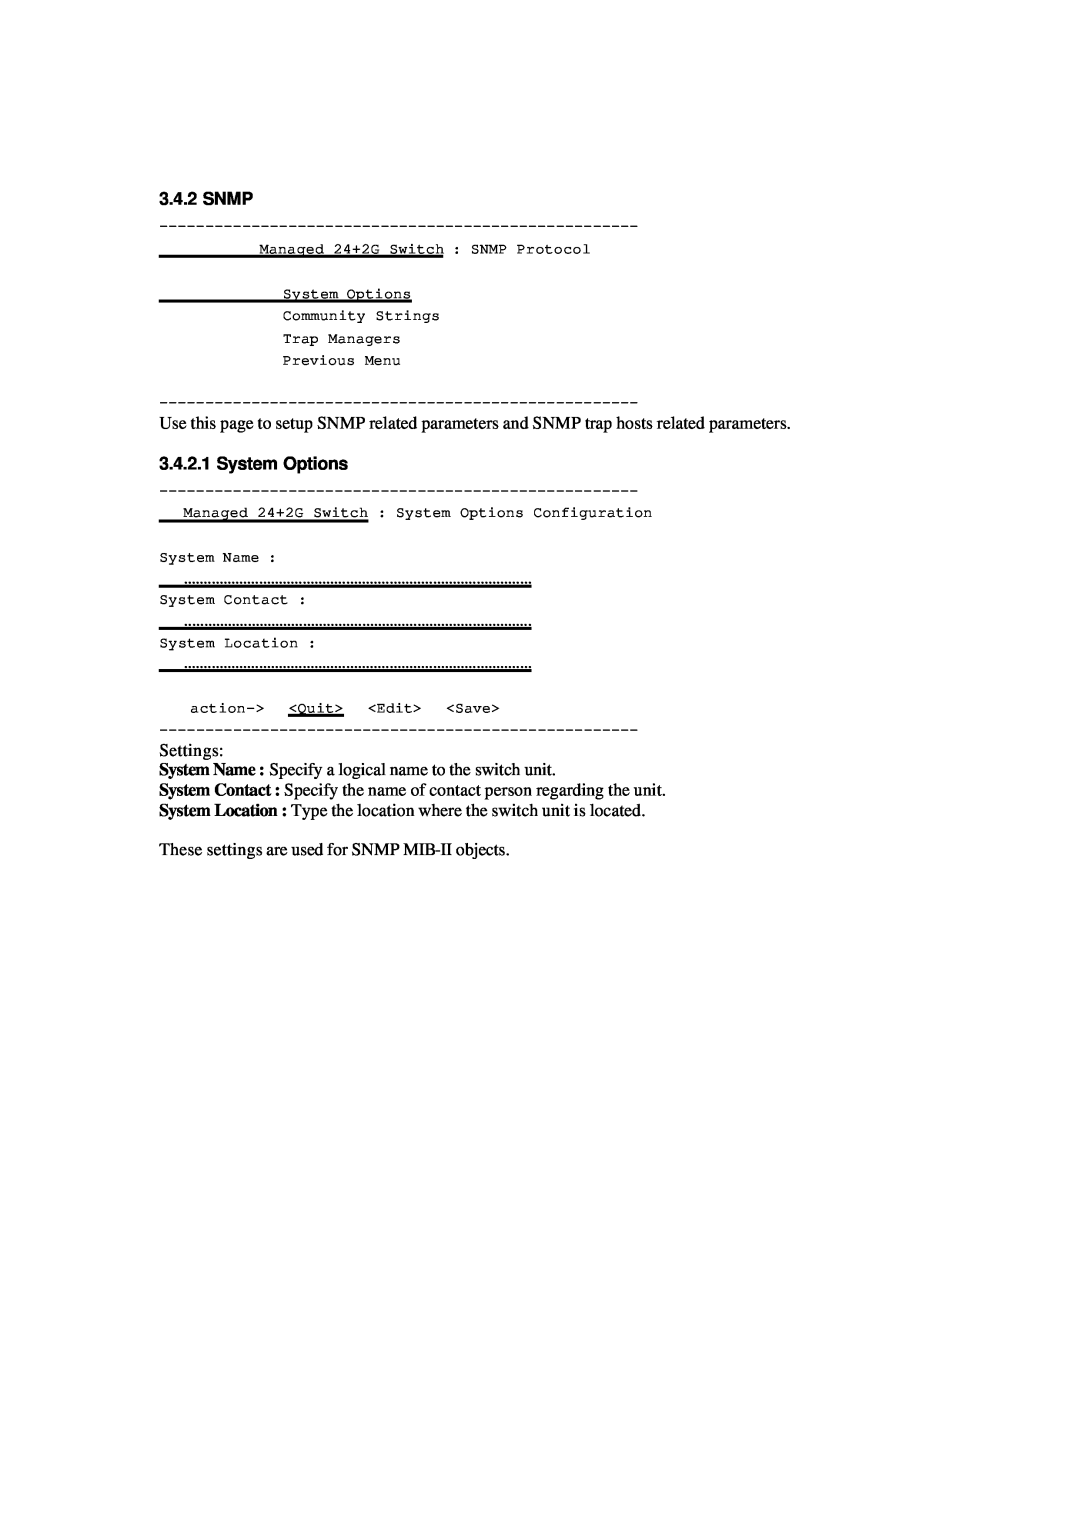 Xerox NS-2260 operation manual Snmp, System Options 